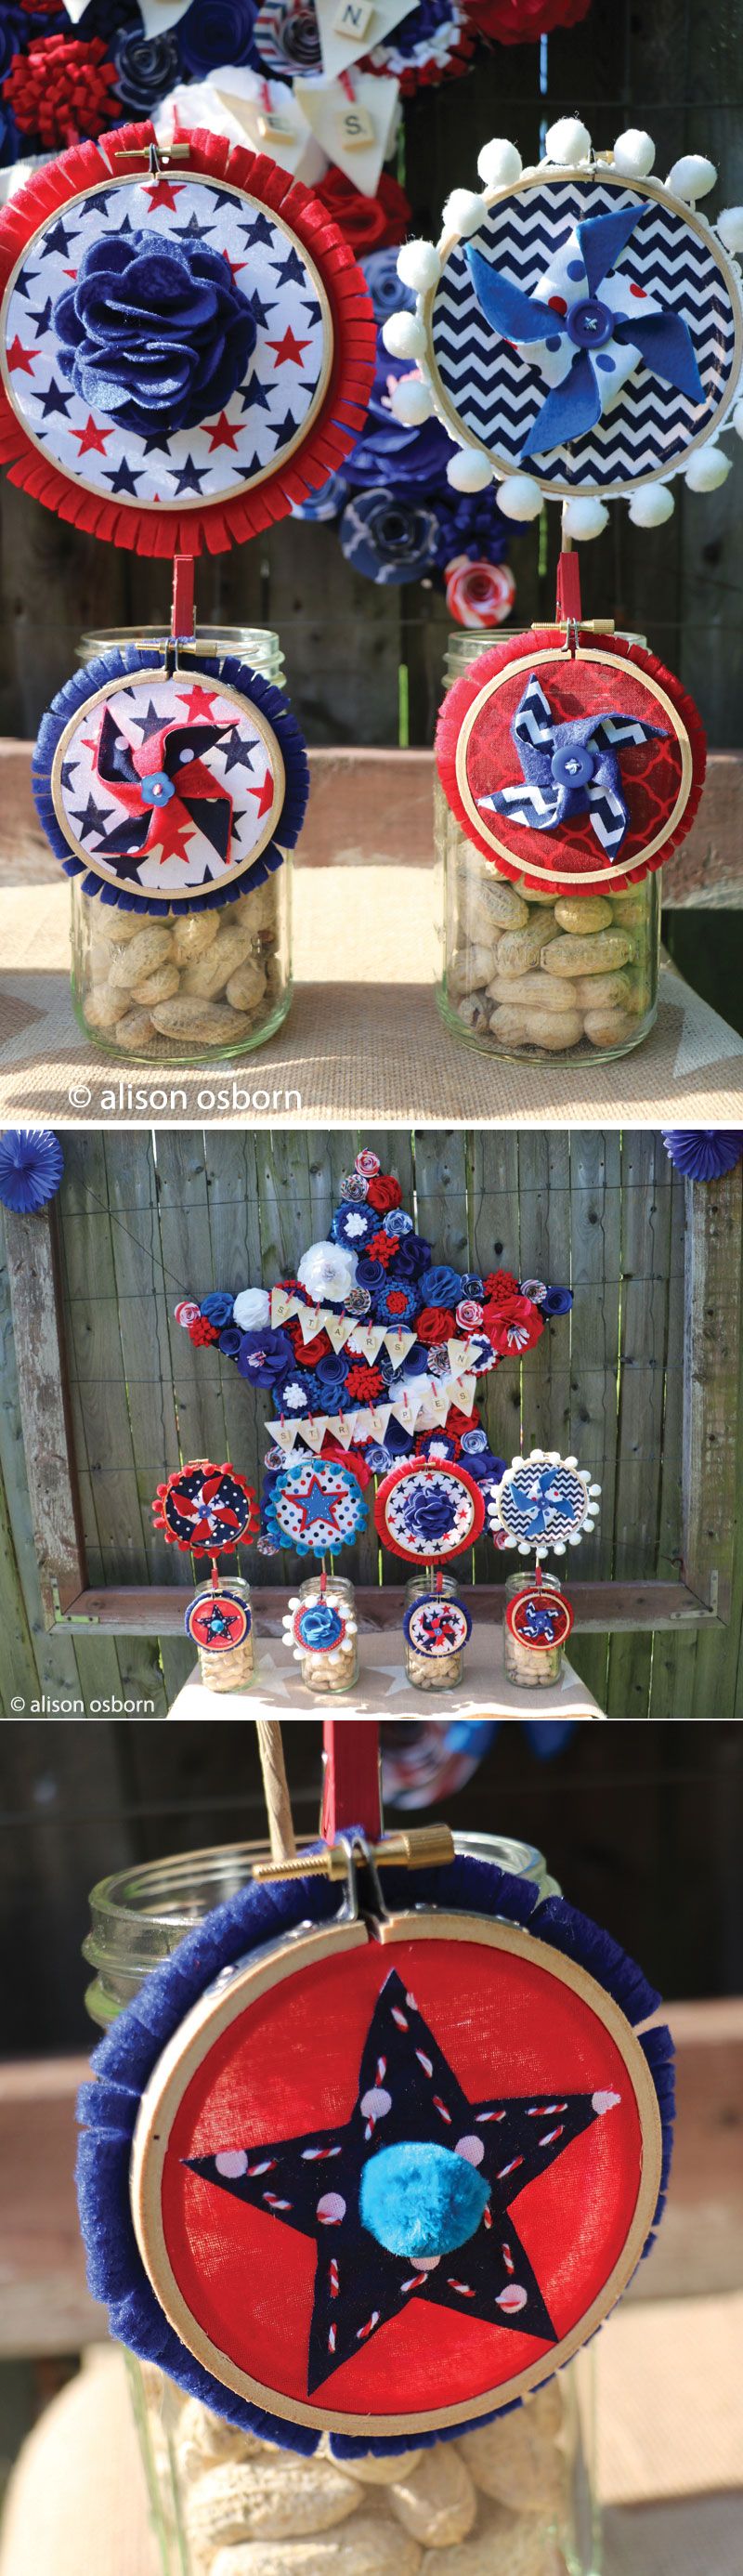 DIY 4th of July Decorations on Love The Day